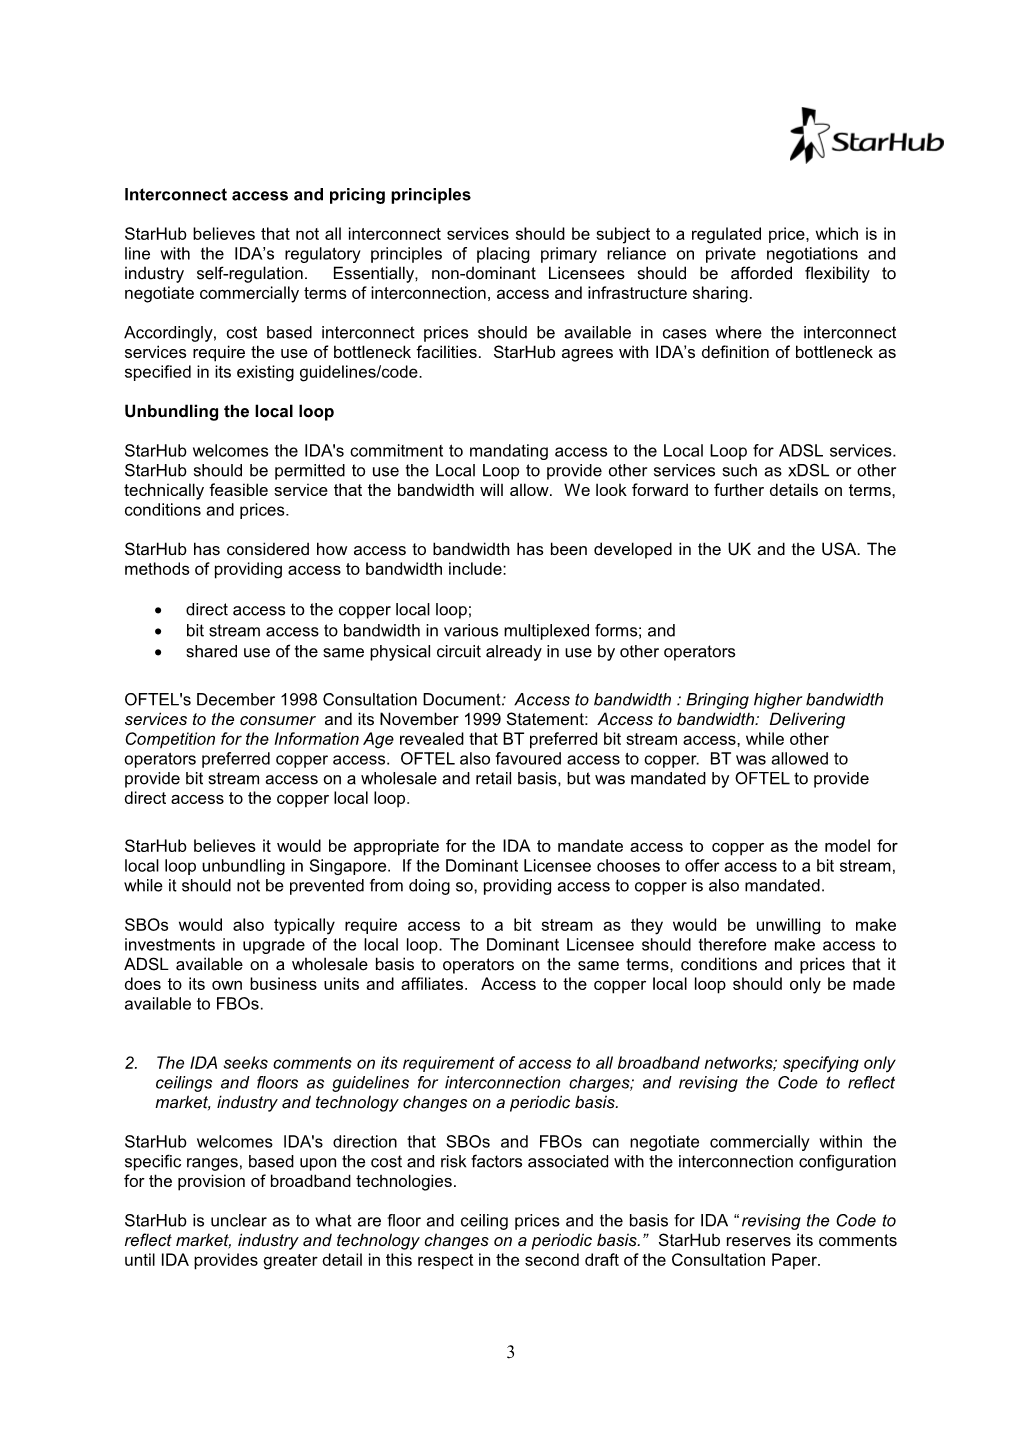 Starhub - Submission on IDA Interconnection/Access Consultation Paper